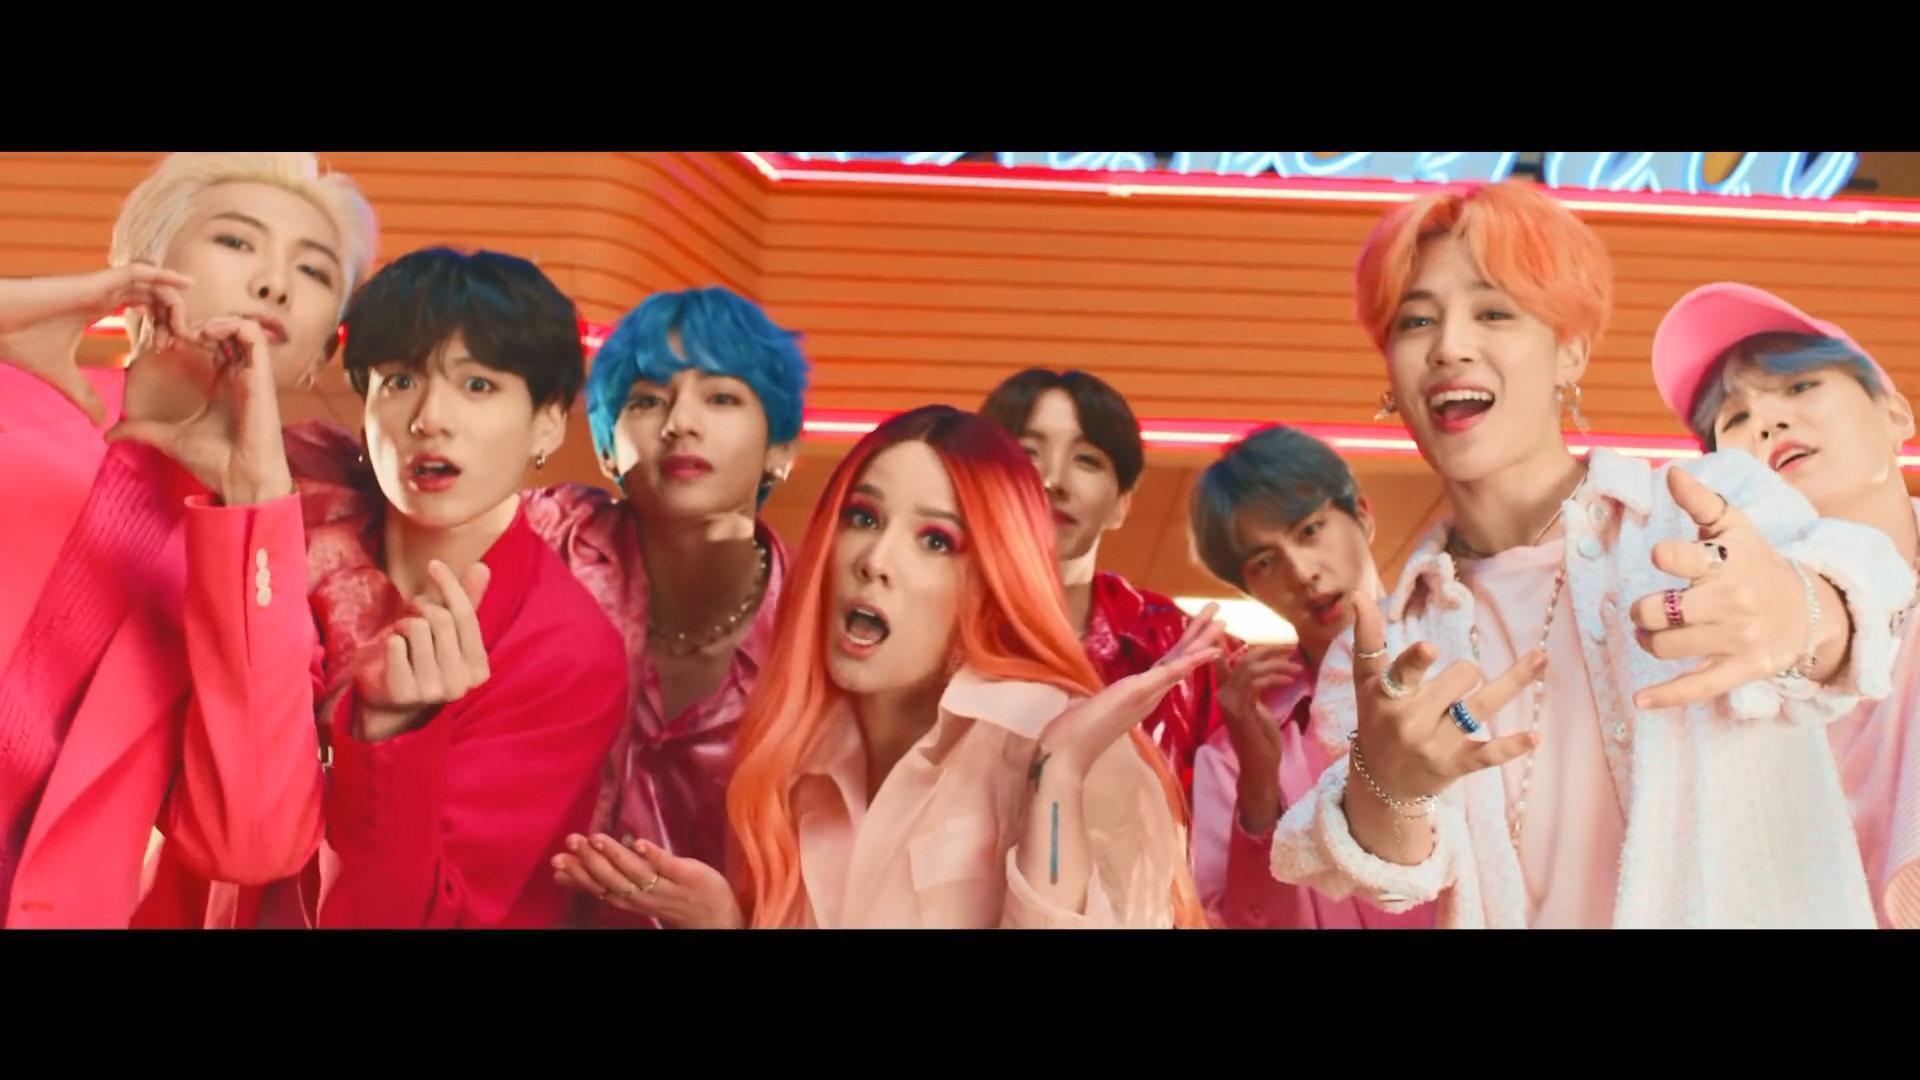 BTS With Luv Who's Who Pop Database / Dbkpop.com